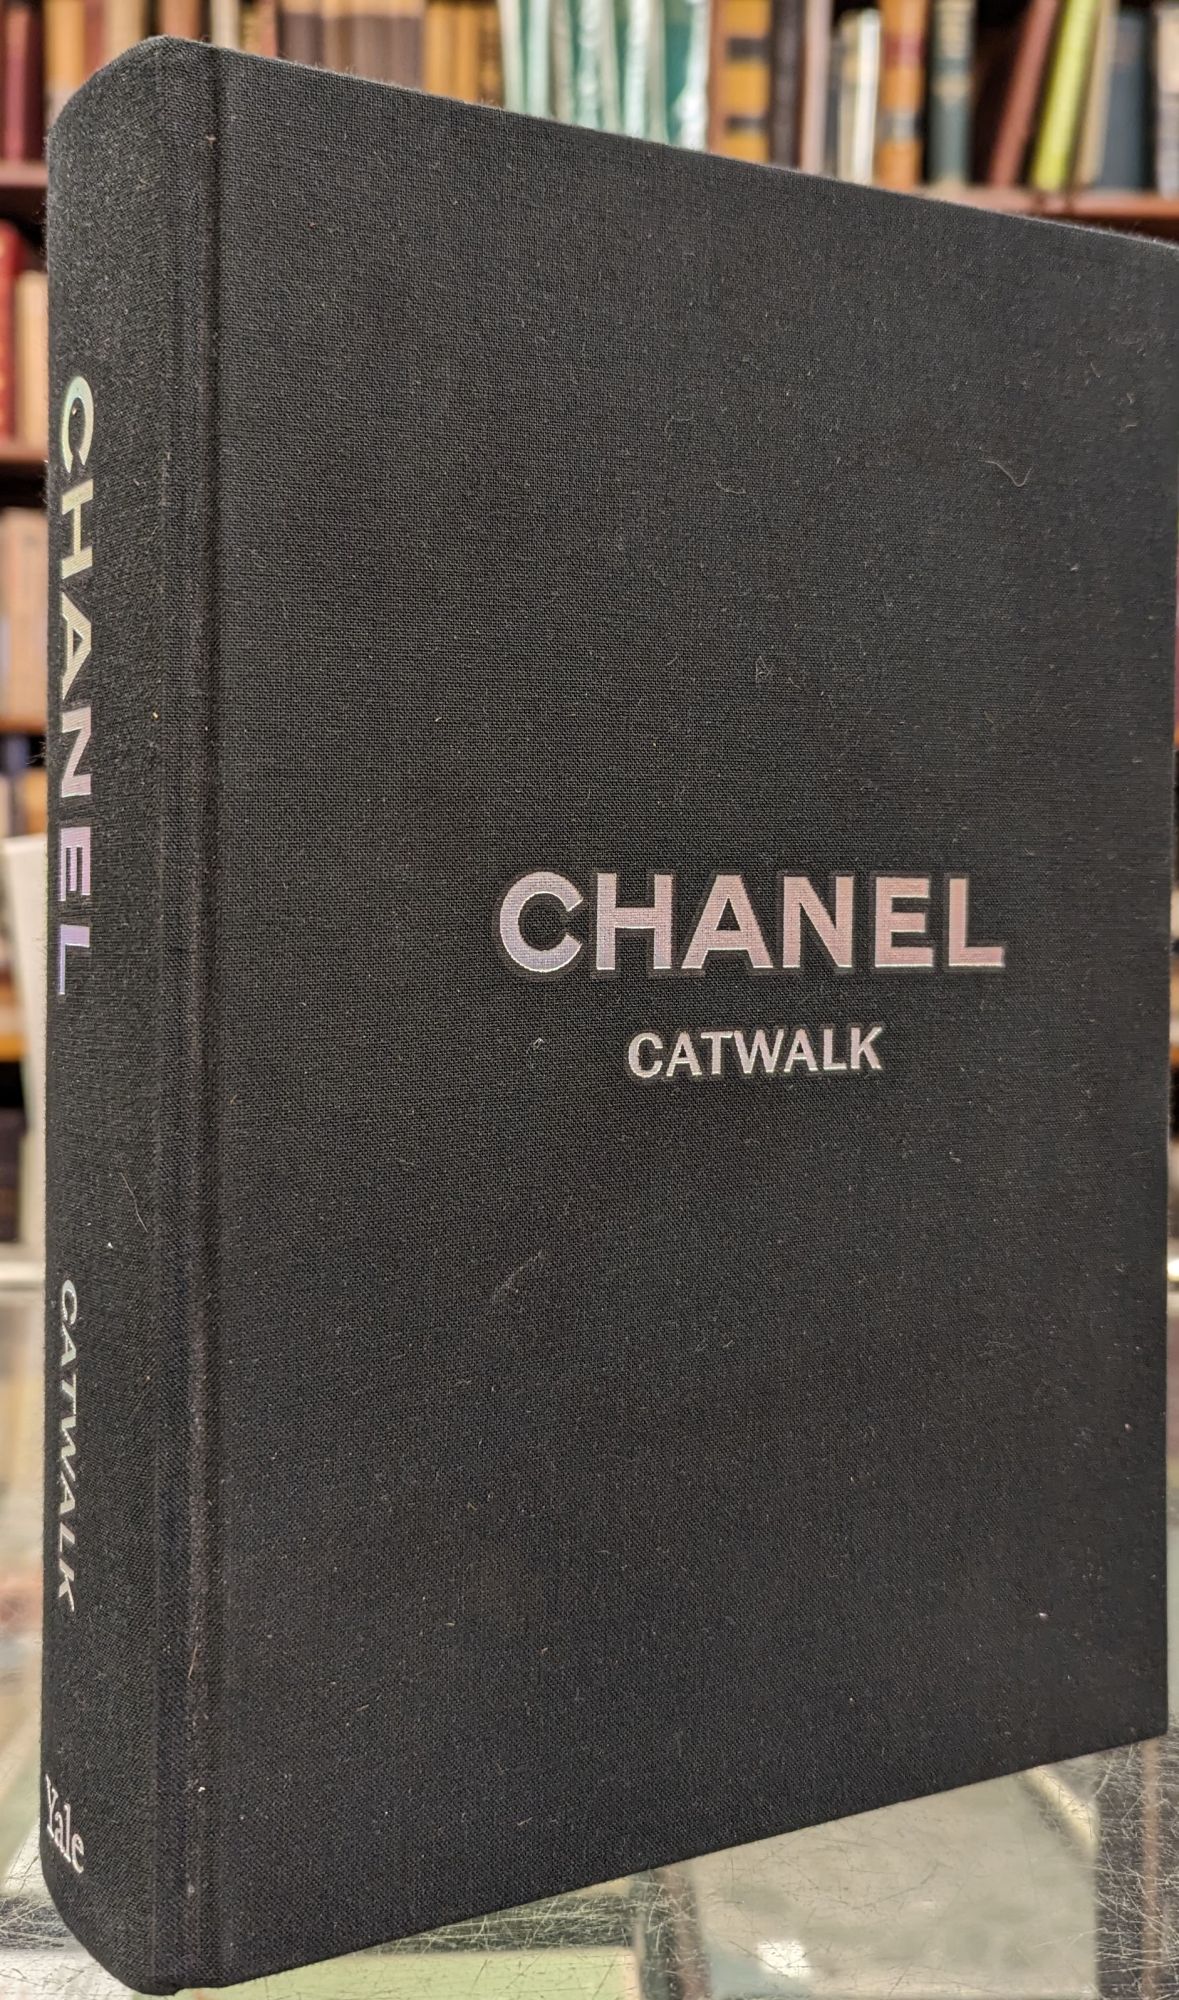 Chanel Catwalk: The Complete Karl Lagerfeld Collections by Mauriès,  Patrick: Very good Hardcover (2016)